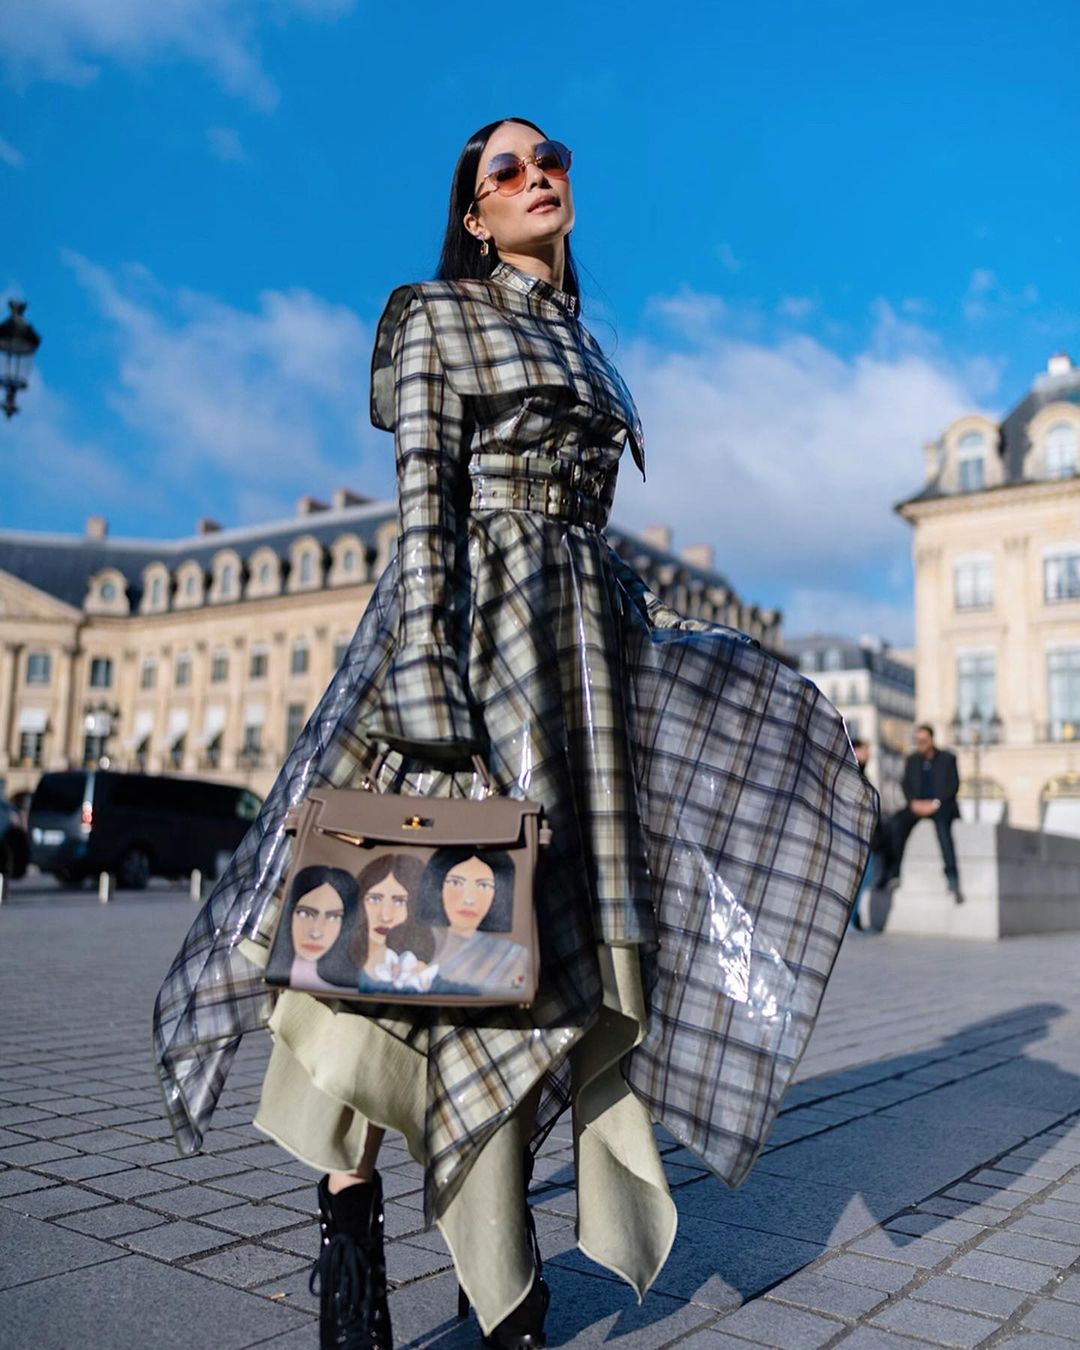 Christian Louboutin visits Heart Evangelista in her Paris apartment